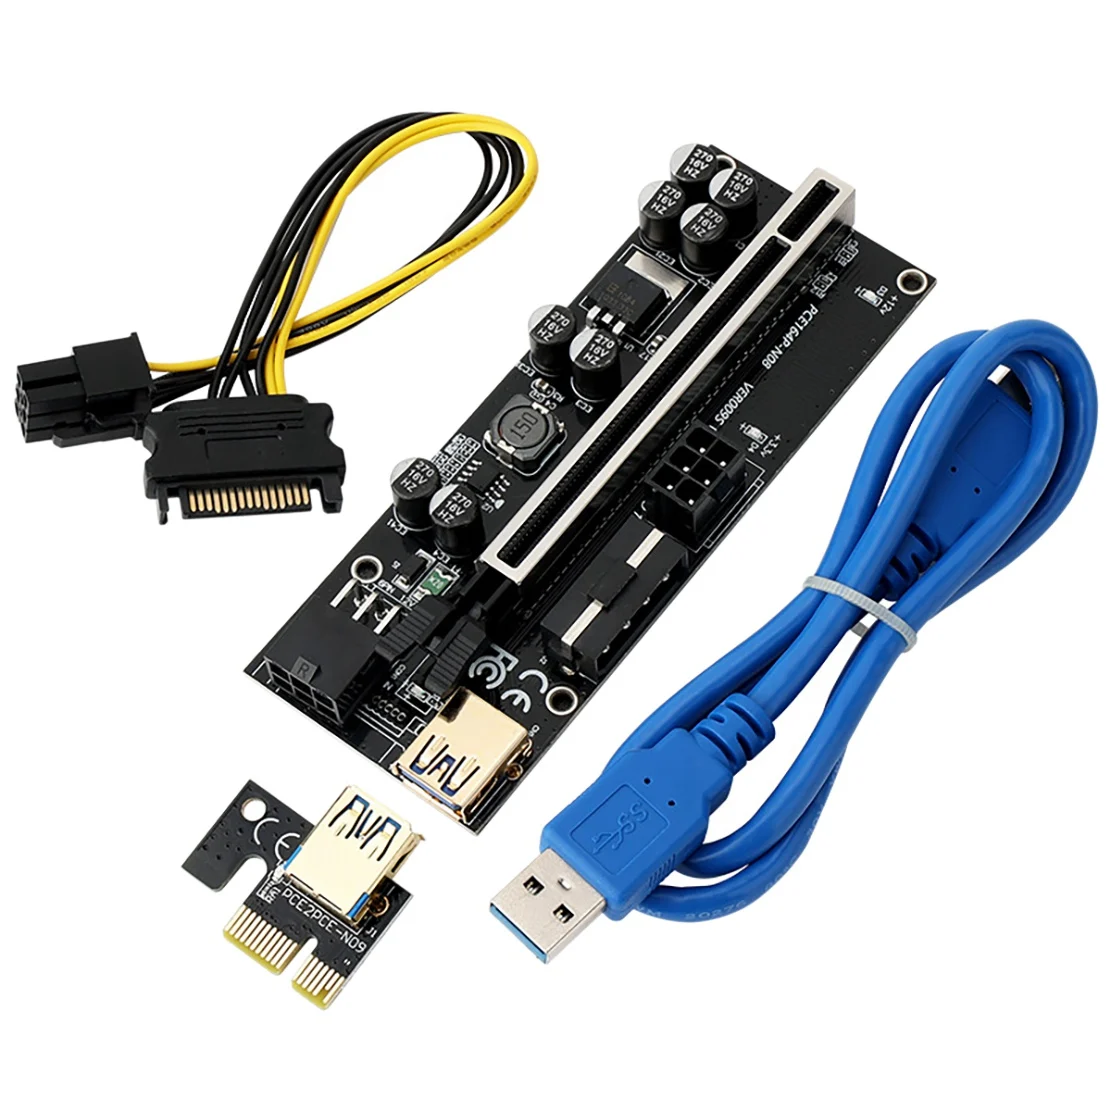 

1 Pcs VER009S PLUS Enhanced Version PCI-E 1X to 16X USB3.0 Graphics Riser Card with 8 Solid Capacitors for BTC Mining